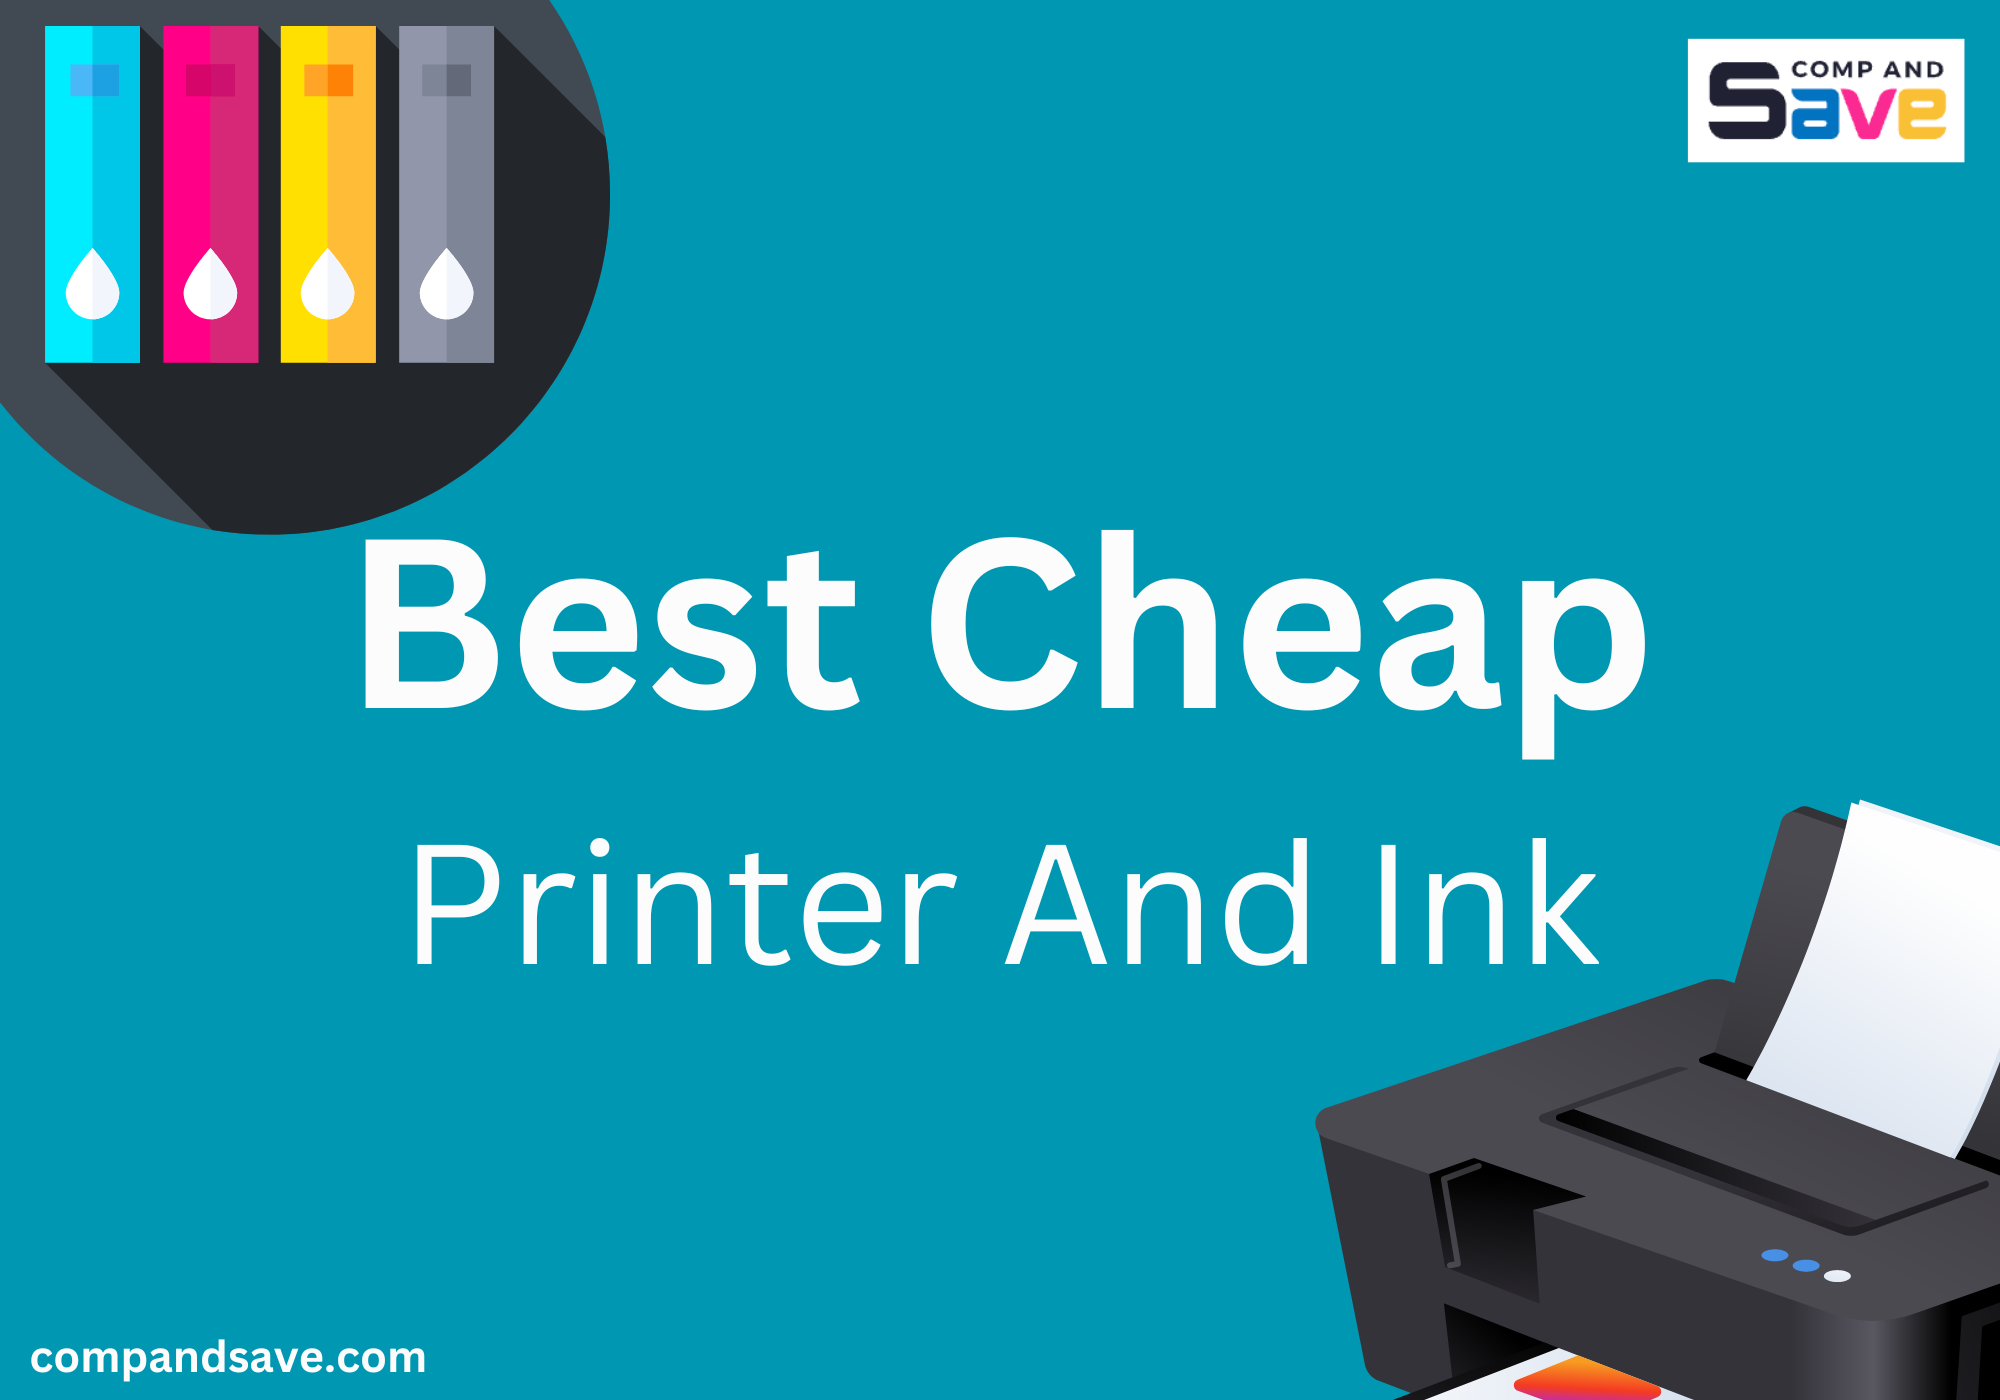 image from Best Cheap Printer and Ink for Homes, Office, and Students